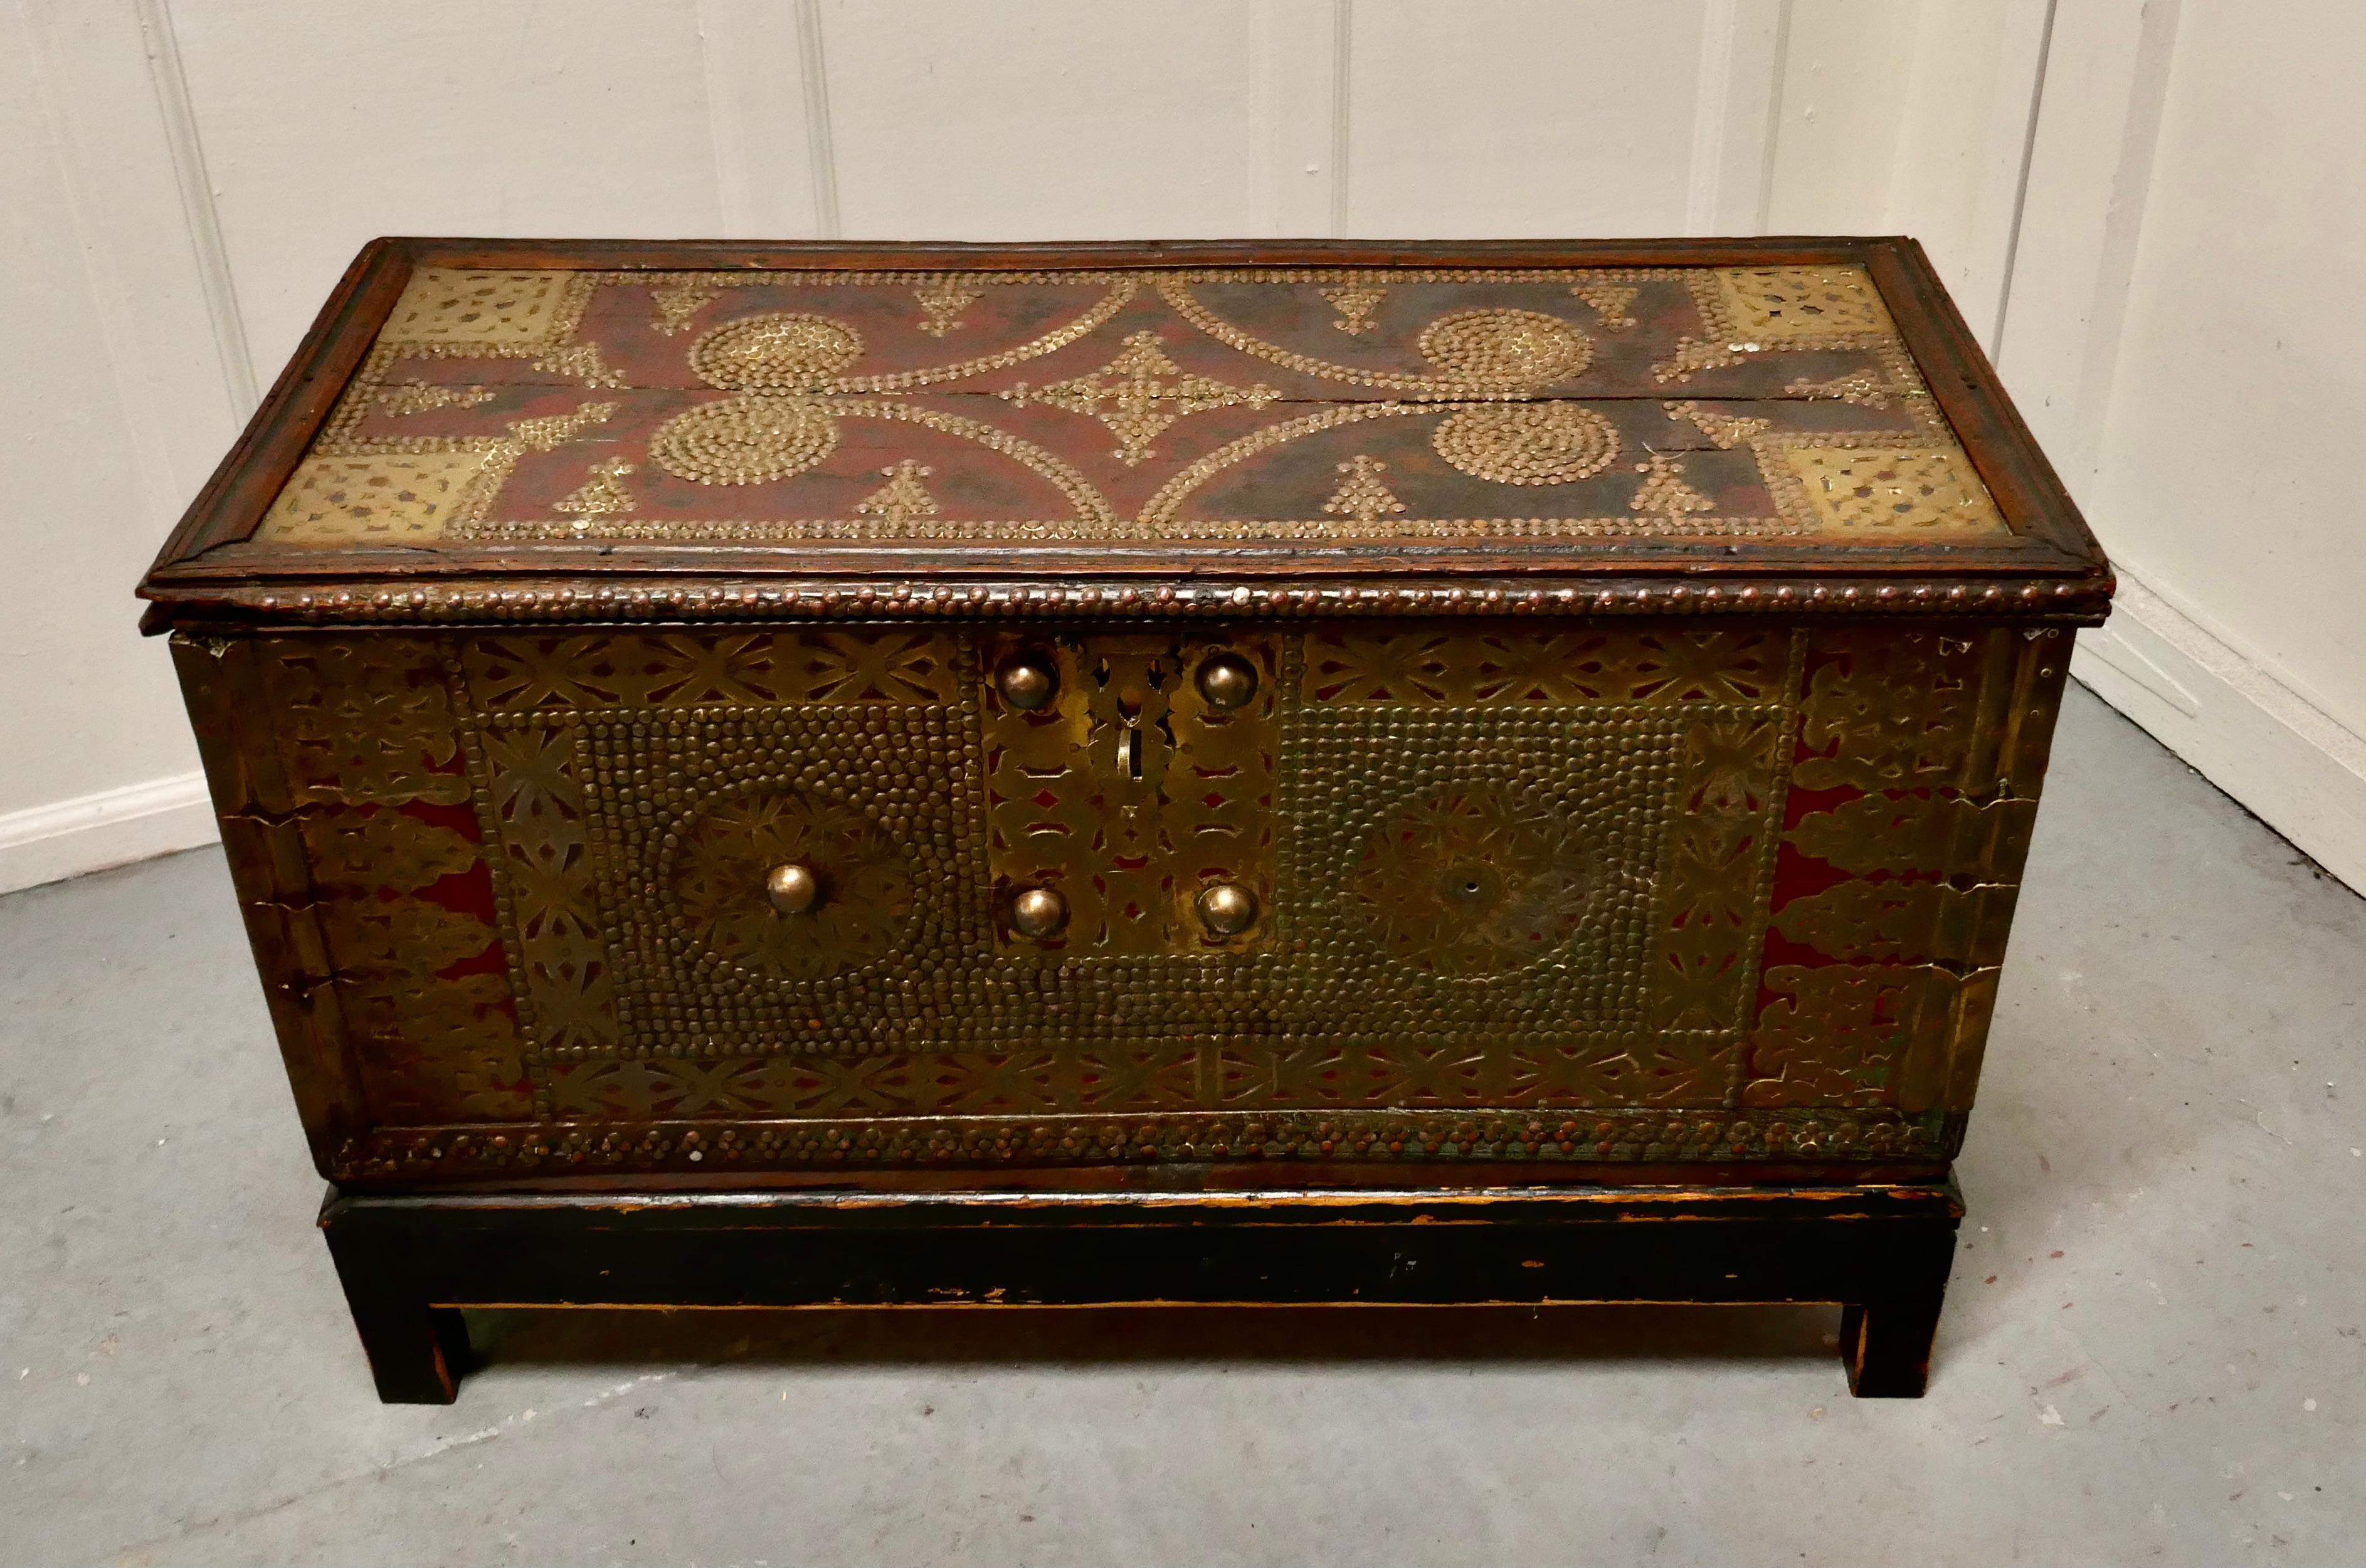 A 19th century Zanzibar trunk.


A superb piece showing the wonderful craftsmanship of the brass workers 
This hardwood chest which originally was painted in red some of which has now worn away is decorated with brass studs and fretwork
Dowry